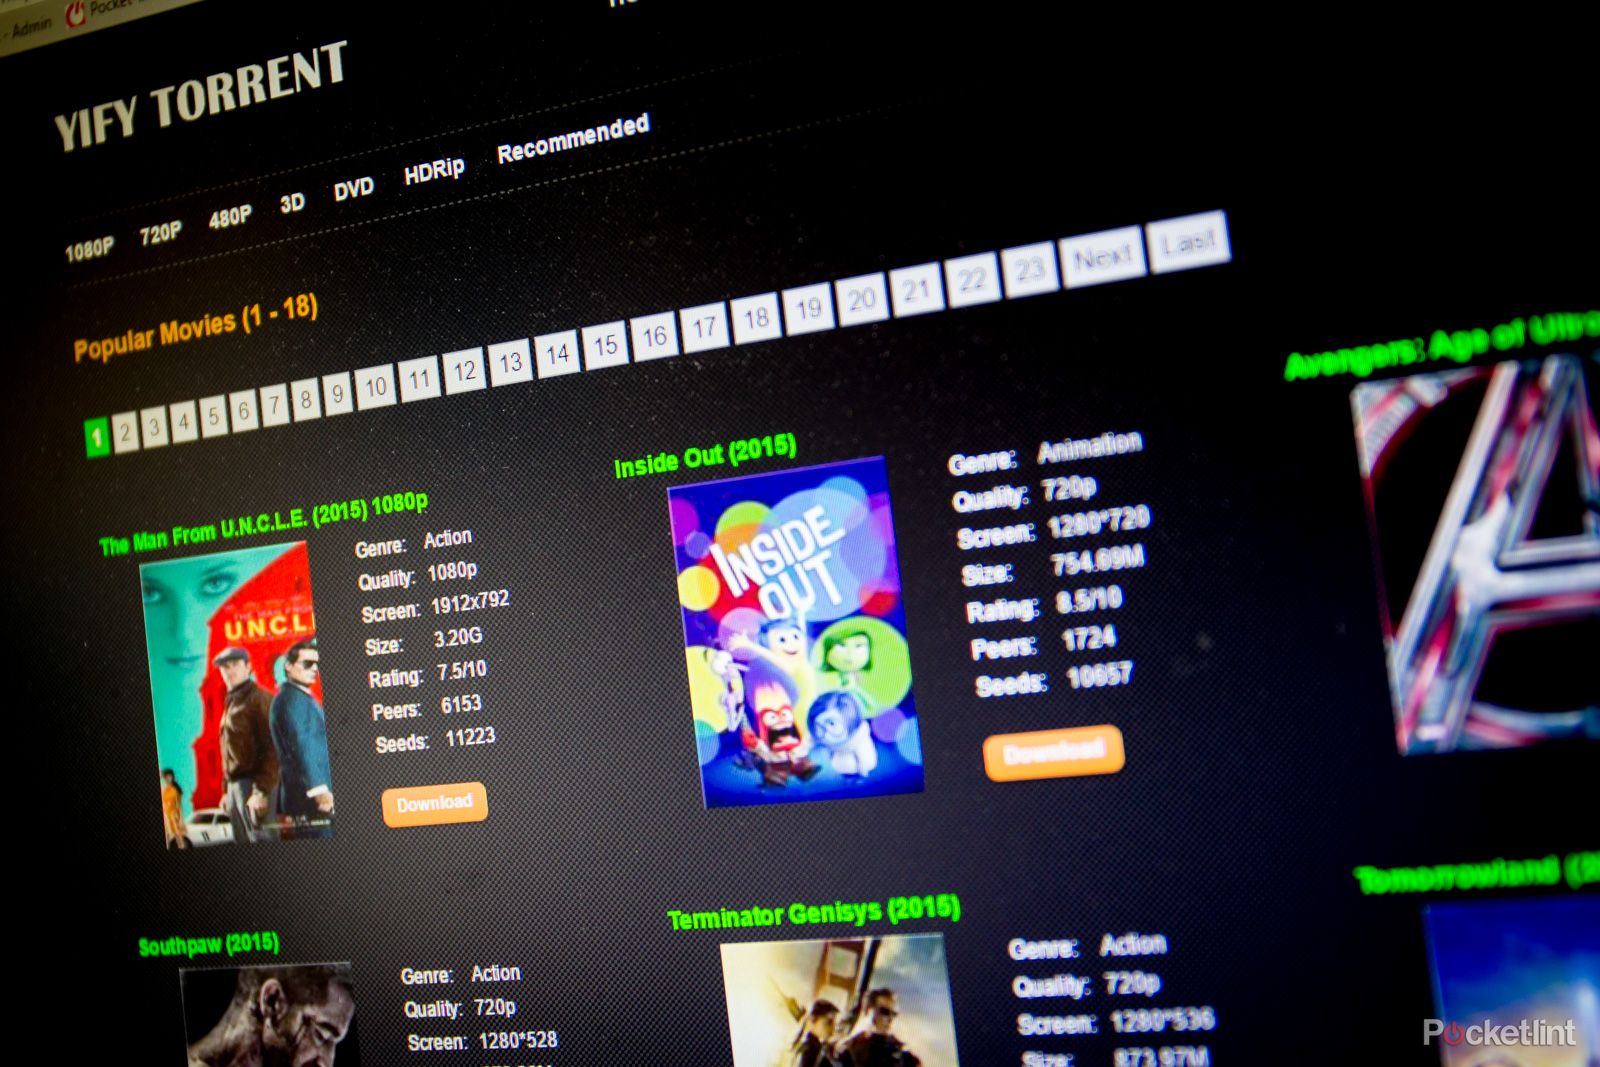 yify no more pirate king of movie torrents shut down image 1